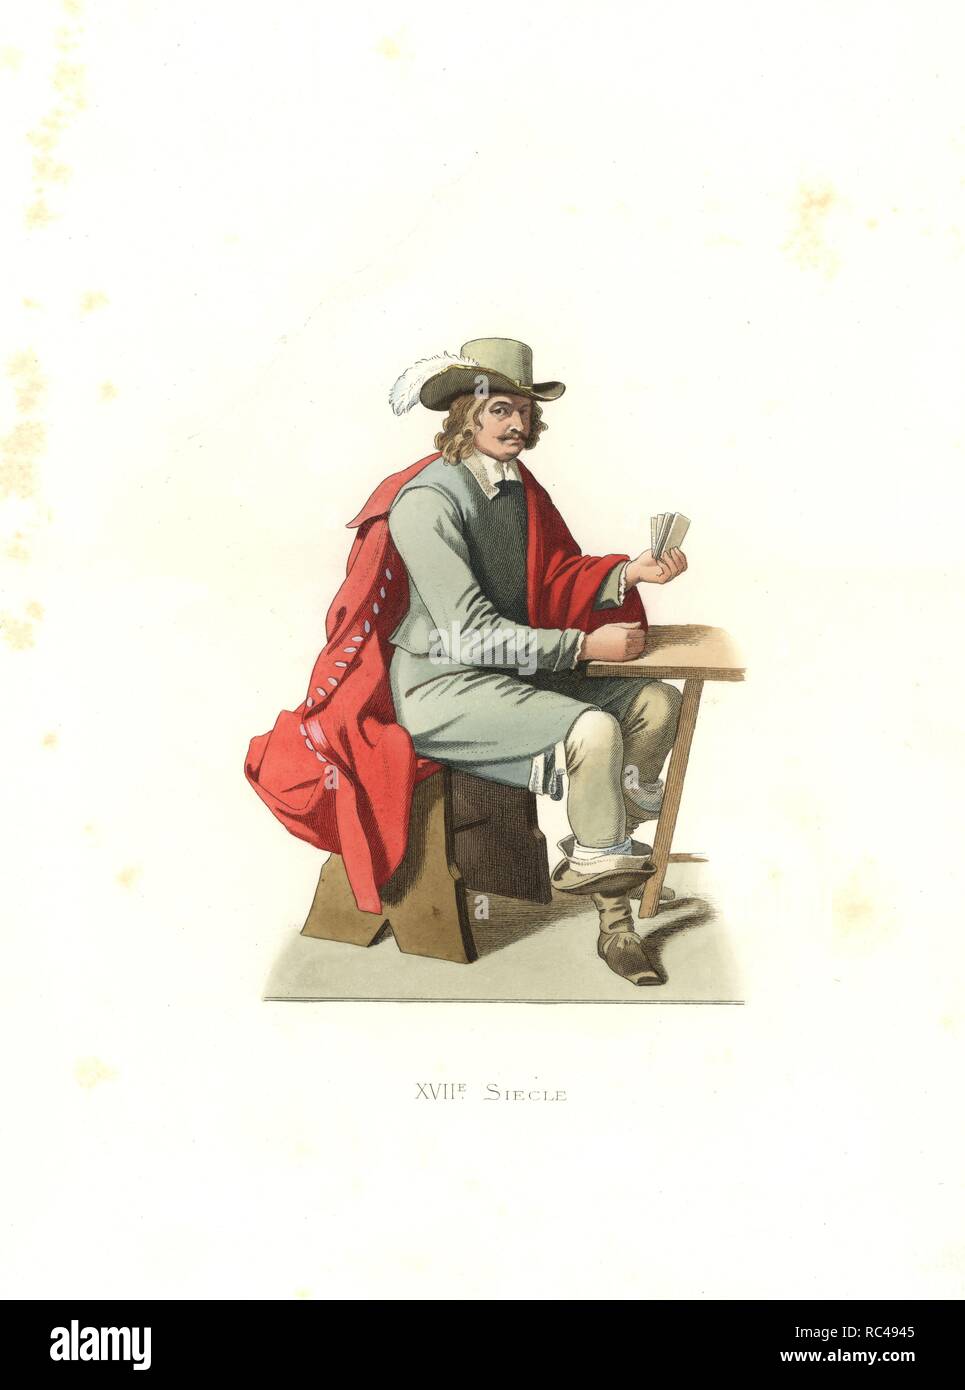 Officer from the Low Countries, 17th century, from a painting by David Teniers in the Louvre. Handcolored illustration by E. Lechevallier-Chevignard, lithographed by A. Didier, L. Flameng, F. Laguillermie, from Georges Duplessis's 'Costumes historiques des XVIe, XVIIe et XVIIIe siecles' (Historical costumes of the 16th, 17th and 18th centuries), Paris 1867. The book was a continuation of the series on the costumes of the 12th to 15th centuries published by Camille Bonnard and Paul Mercuri from 1830. Georges Duplessis (1834-1899) was curator of the Prints department at the Bibliotheque national Stock Photo